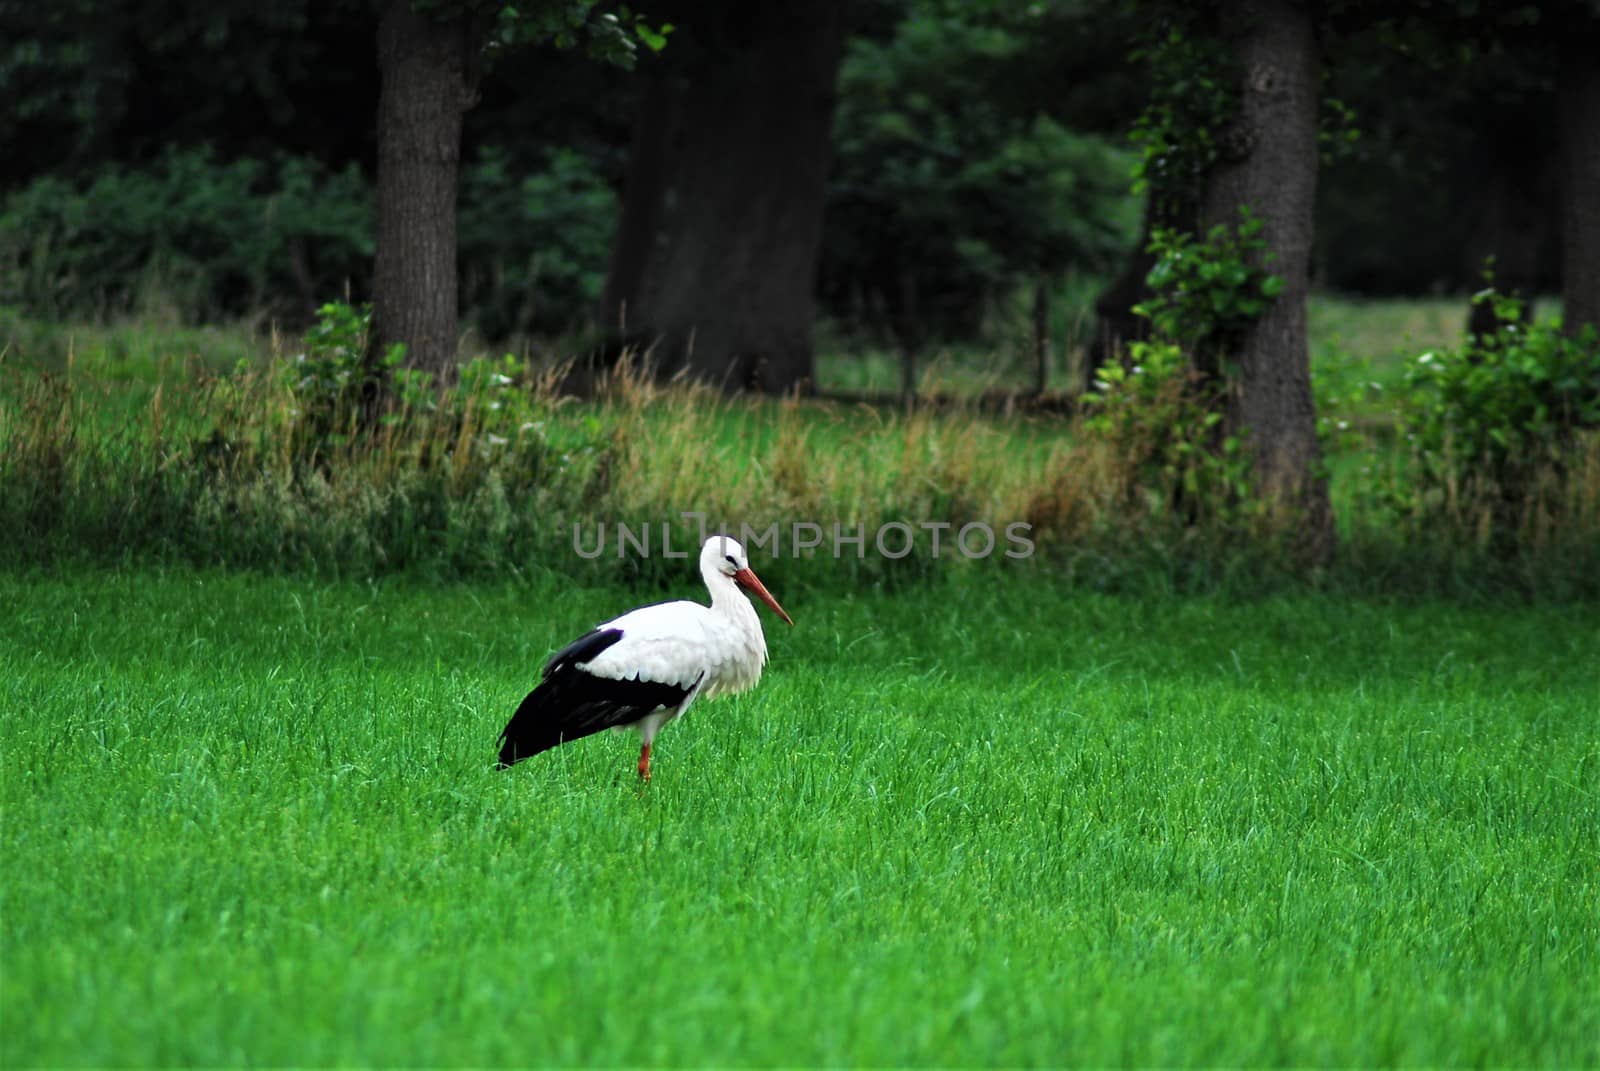 A white storck on a mown pasture by Luise123